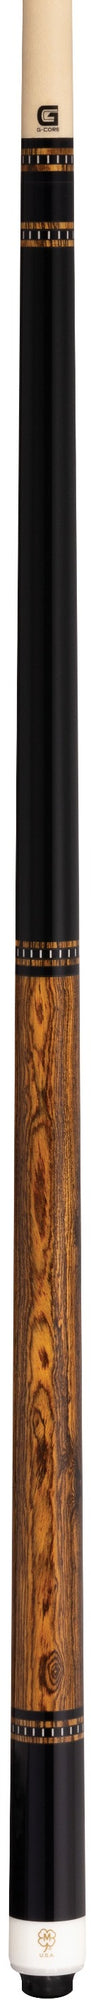 McDermott Mcdermott G440C Pool Cue | G-Core - Cue of the Month Pool Cue